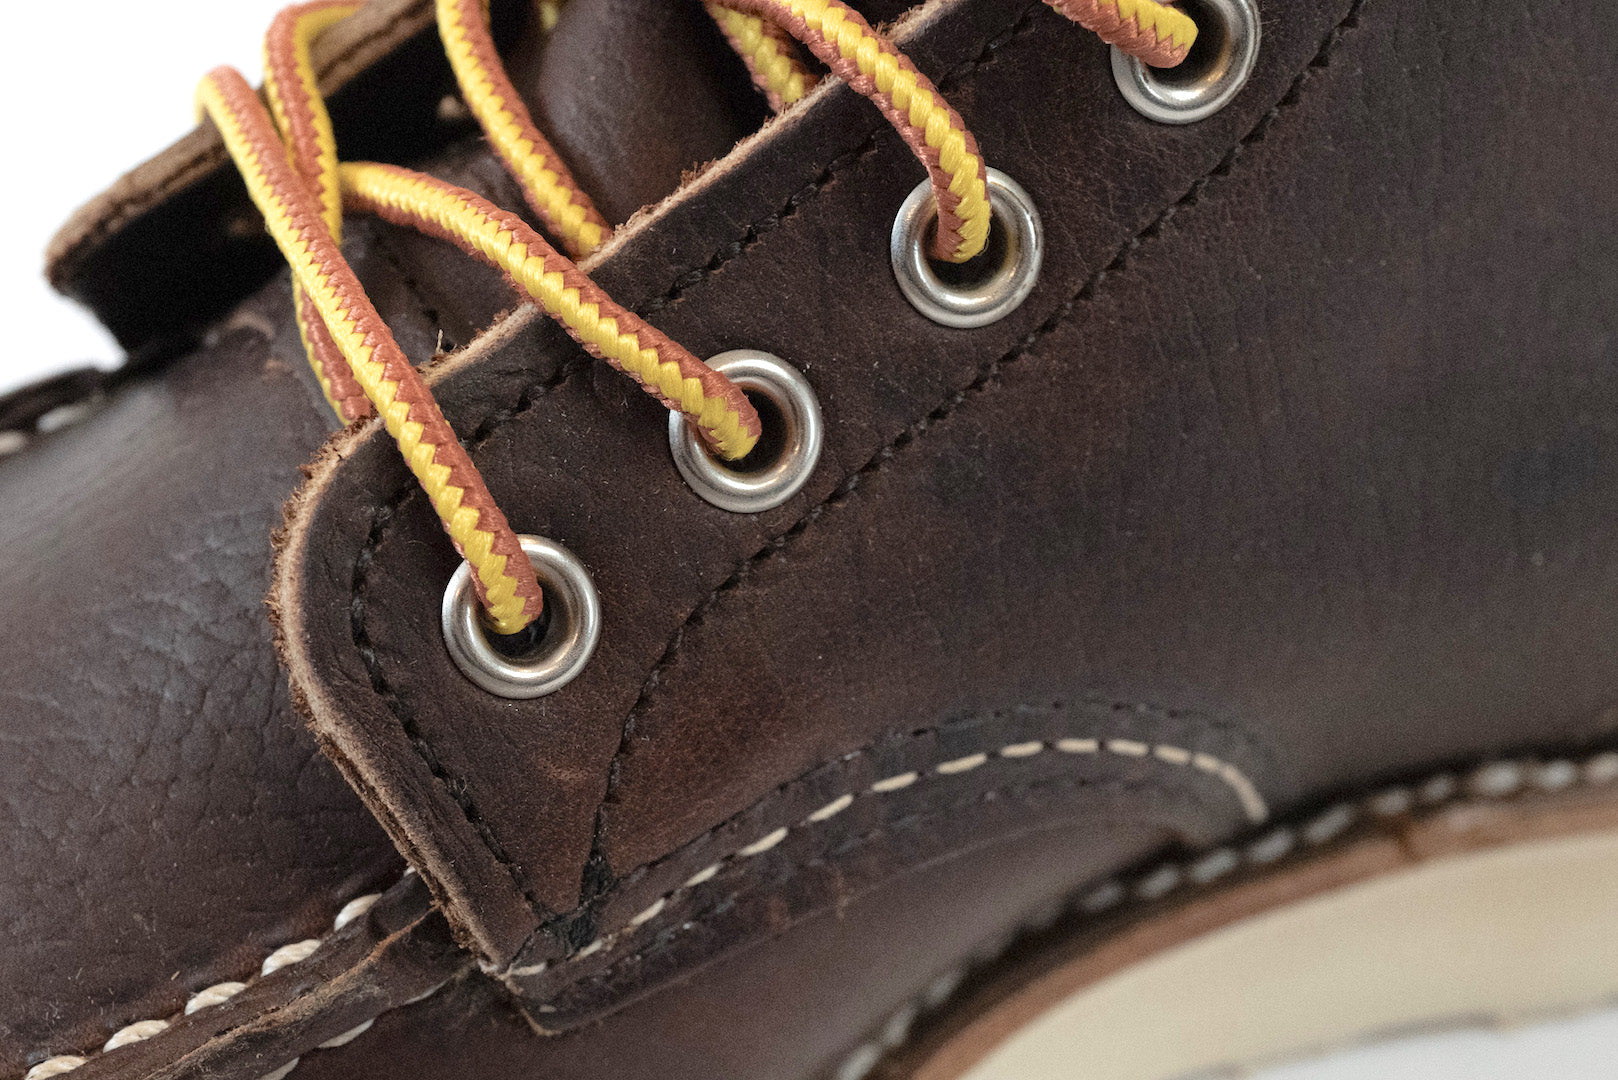 Red Wing Boots 8138